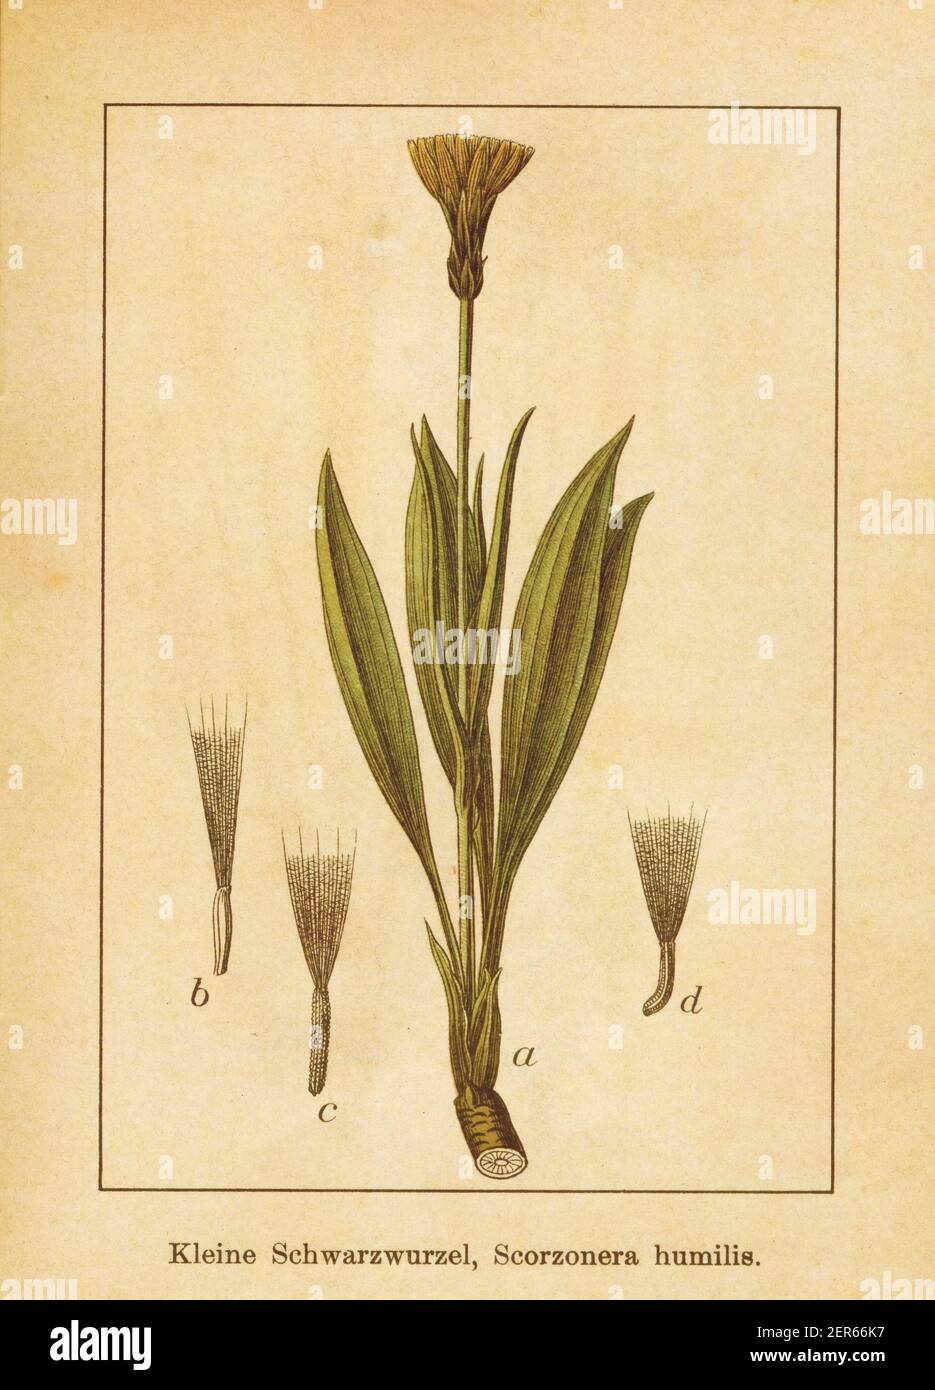 Antique illustration of a scorzonera humilis, also known as viper's grass. Engraved by Jacob Sturm (1771-1848) and published in the book Deutschlands Stock Photo